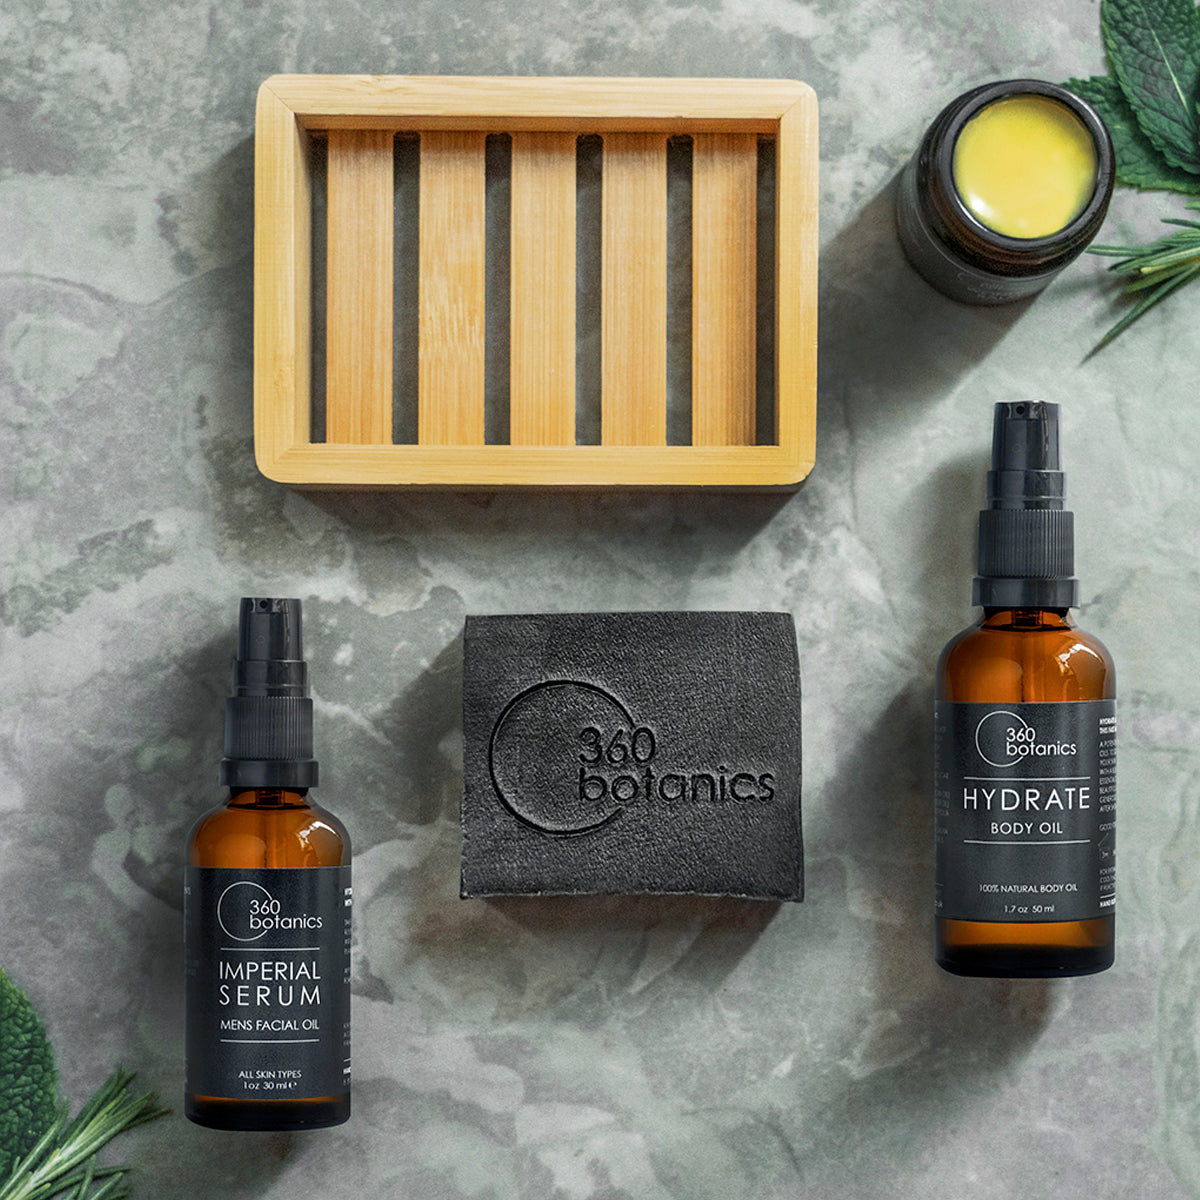 flat lay photograph imperial serum amber bottle, hydrate body oil bottle, black soap, bamboo soap dish on grey marble surface